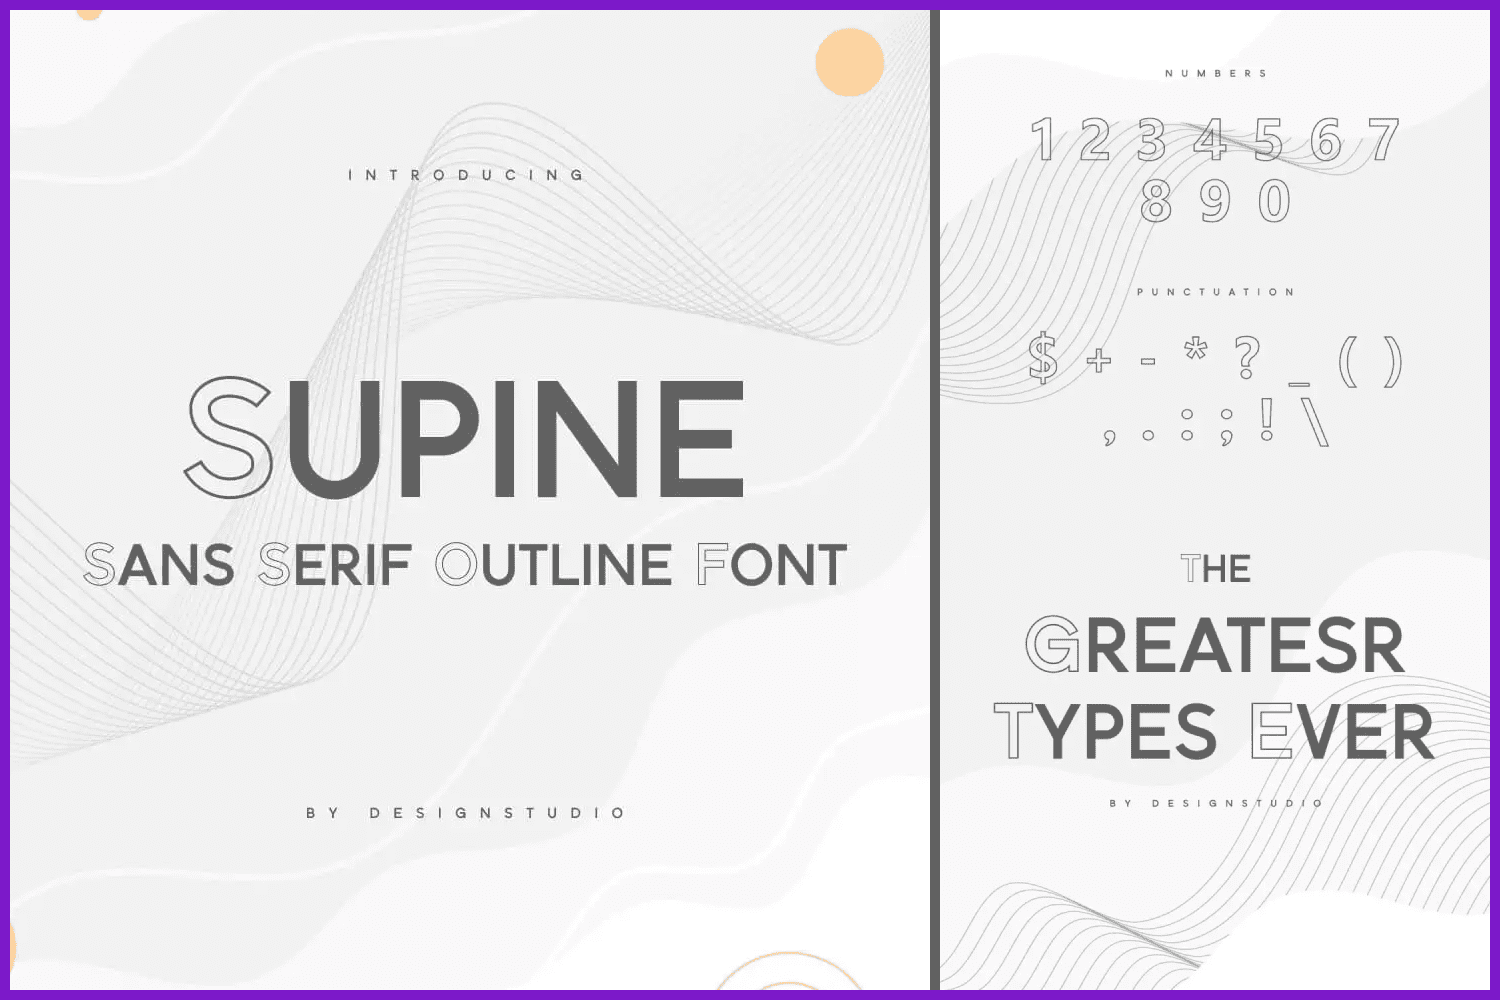 Examples of Supine sans serif outline font on a grey background.